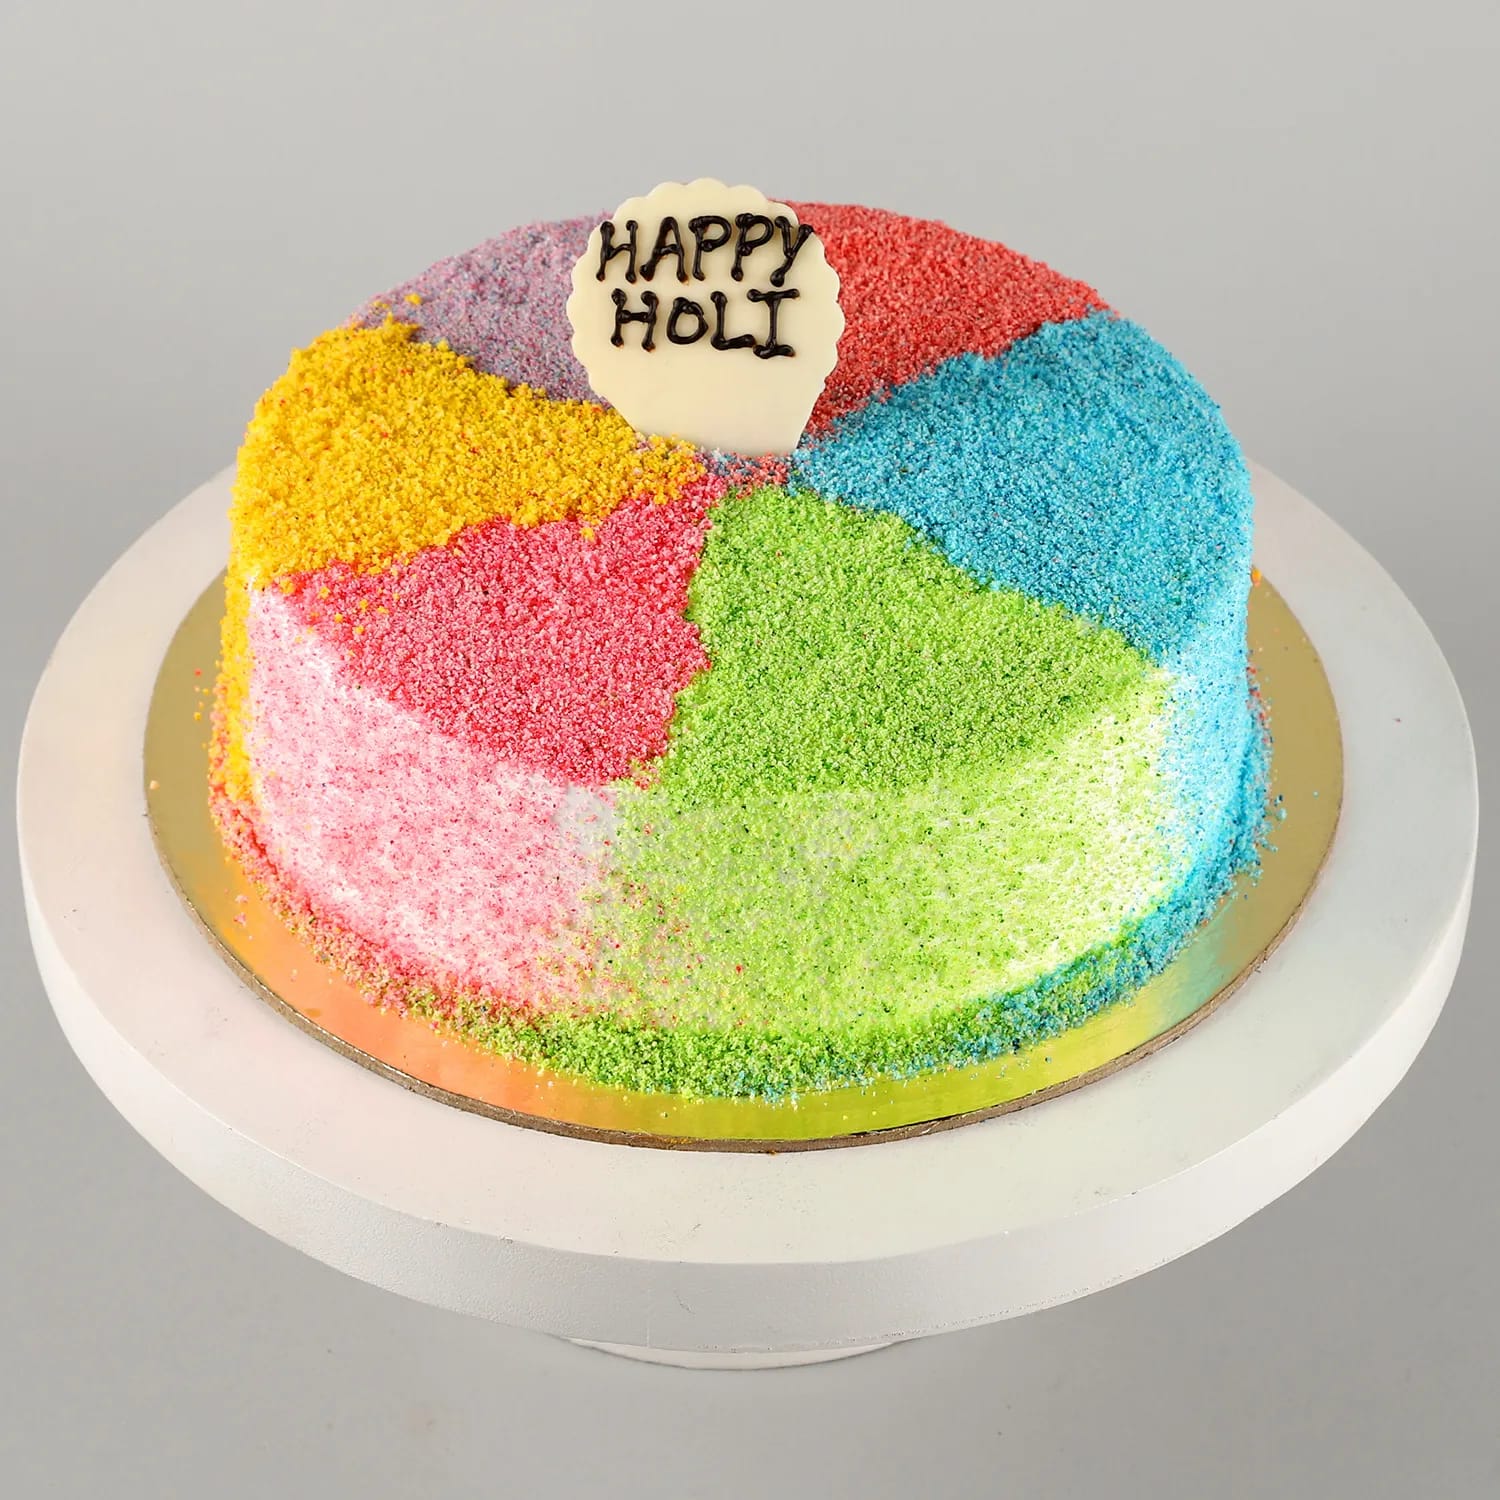 Holi Special with Yummy Cakes